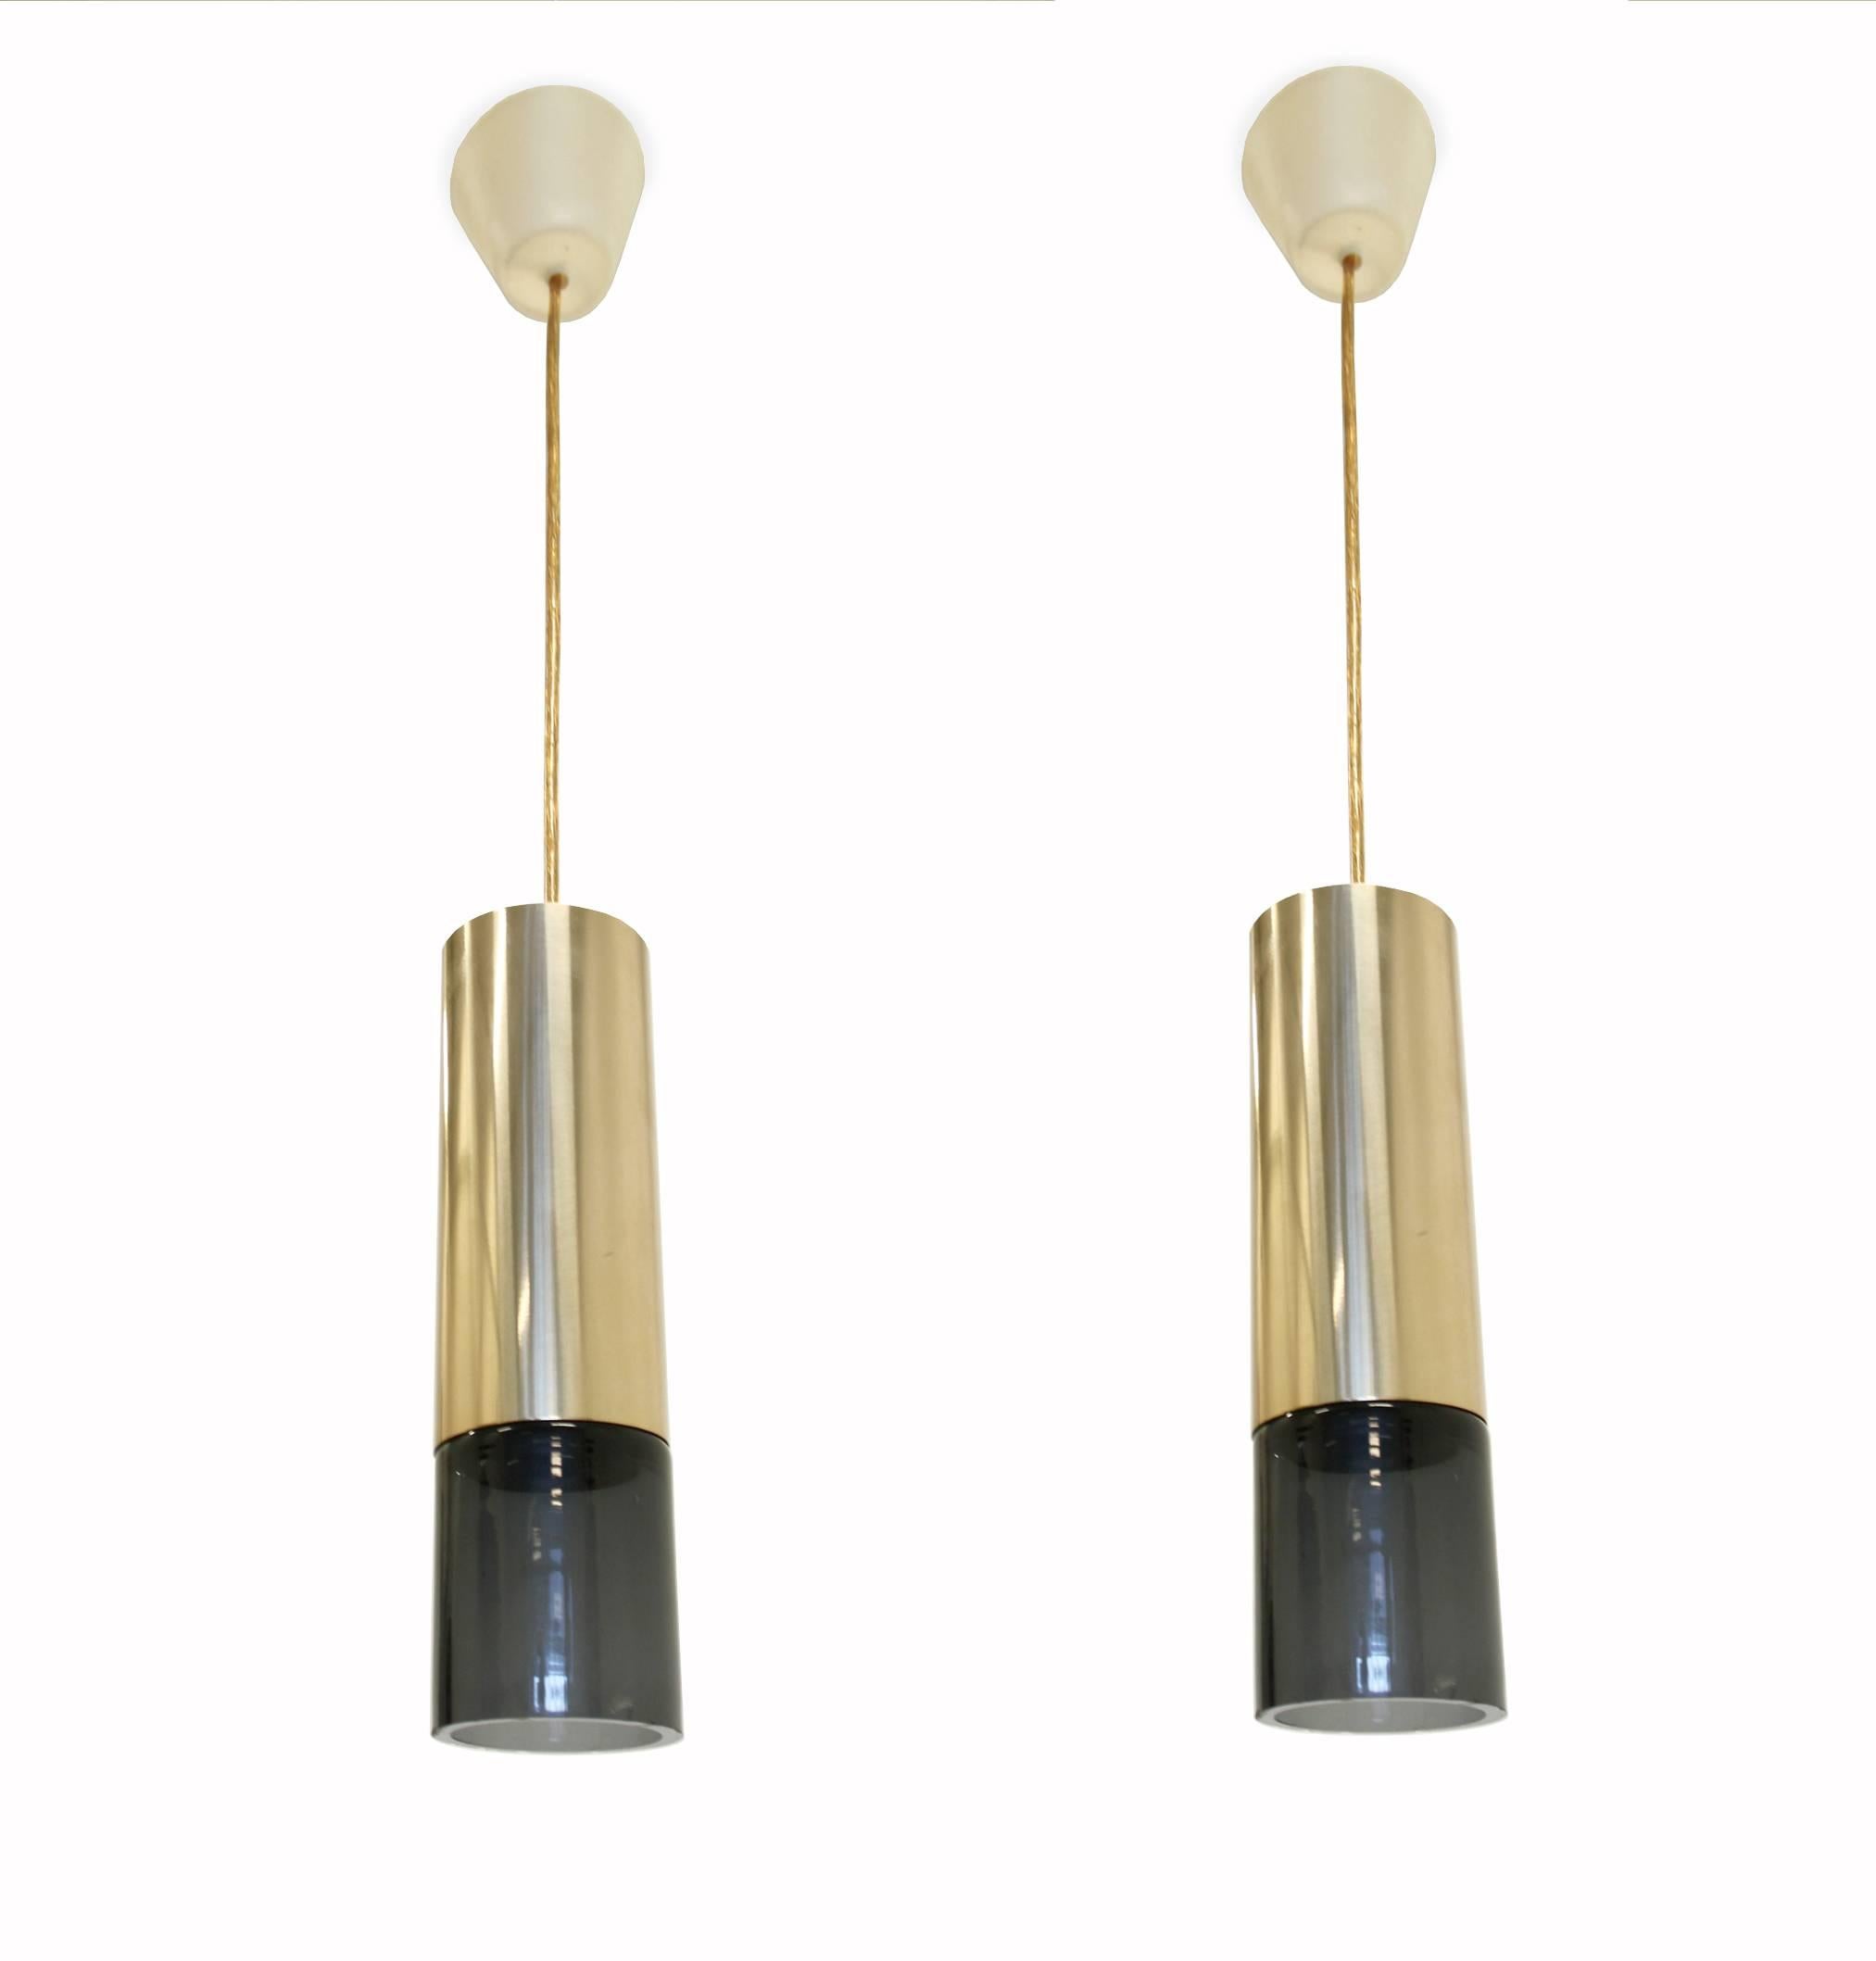 Beautiful and well-made pair of pendants lamps on a brass frame and glass shades.

Made in Norway by Sønnico AS and most likely designed by Kjell Munch, circa 1960s second half.

Both lamps are fully working and in good vintage condition. Some